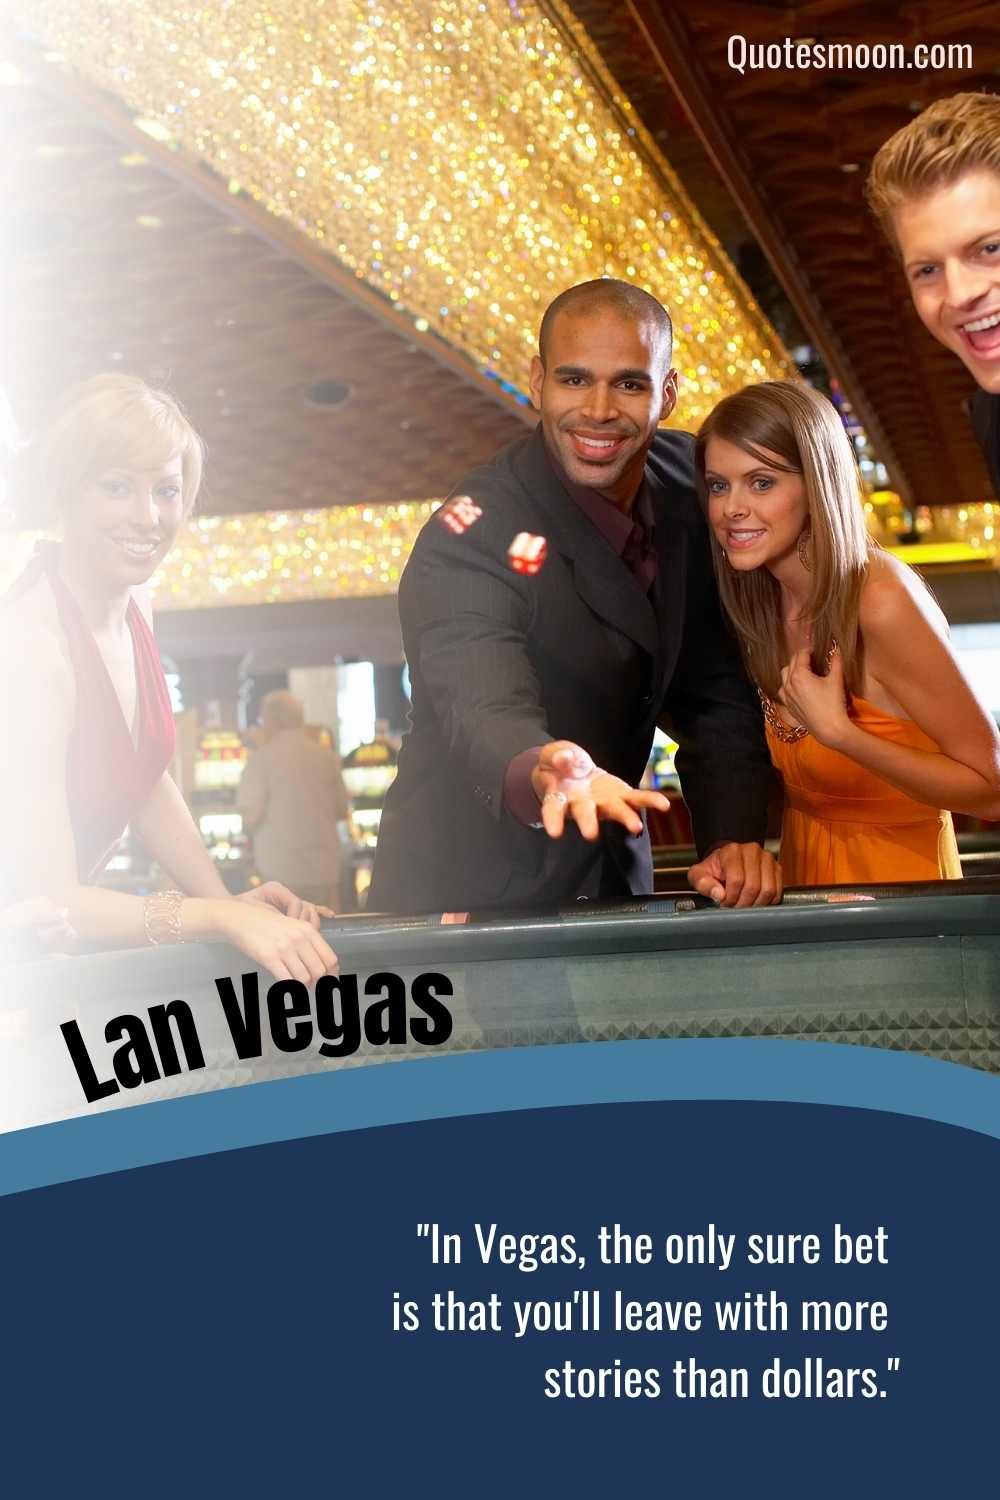 Quotes About Vegas To Inspire Your Next Trip with pics HD